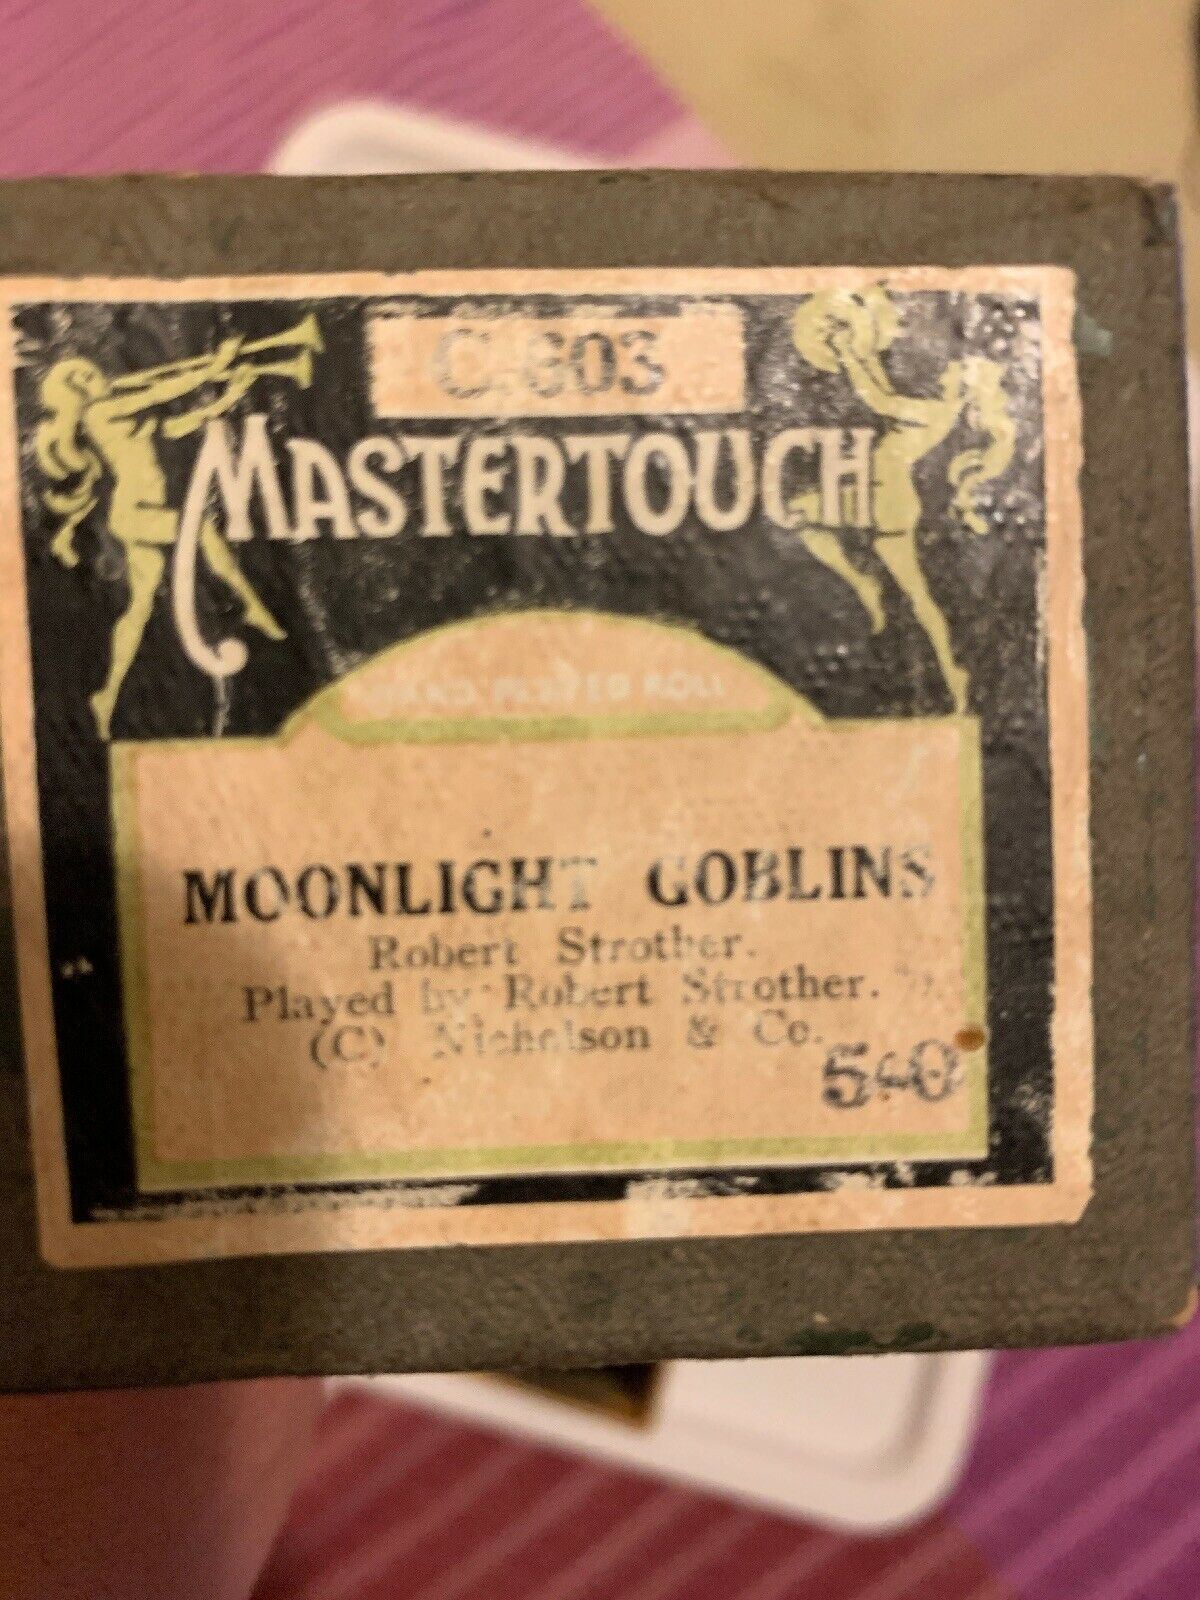 Pianola Roll Mastertouch Moonlight Goblins C.603 Mechanical Music Hand Played Ro